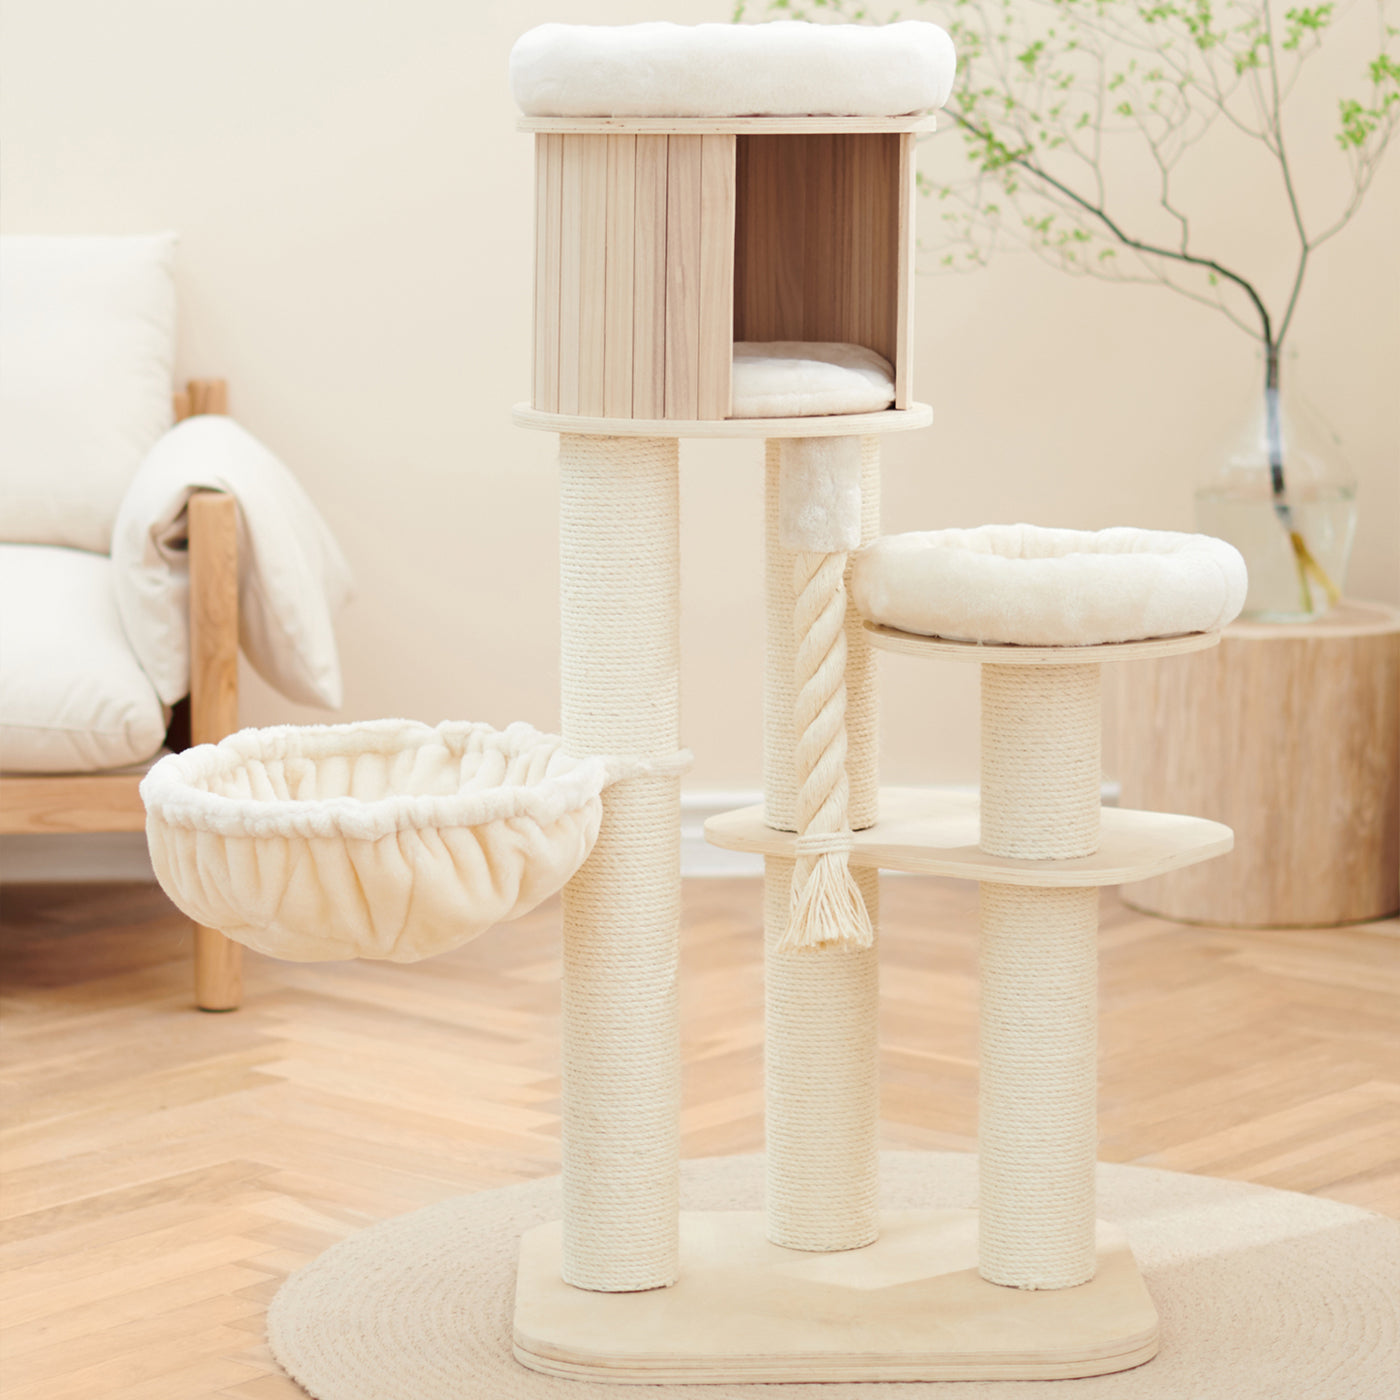 Discover our Luxury Helsinki The Loft Cat Tree. Present your cat with the perfect hideout! Crafted using durable and long-lasting wood that features multiple scratch posts for cats, hanging rope for playtime, a cozy hammock for snuggling into with multiple platforms and a den for pet burrow! Available now at Lords & Labradors US